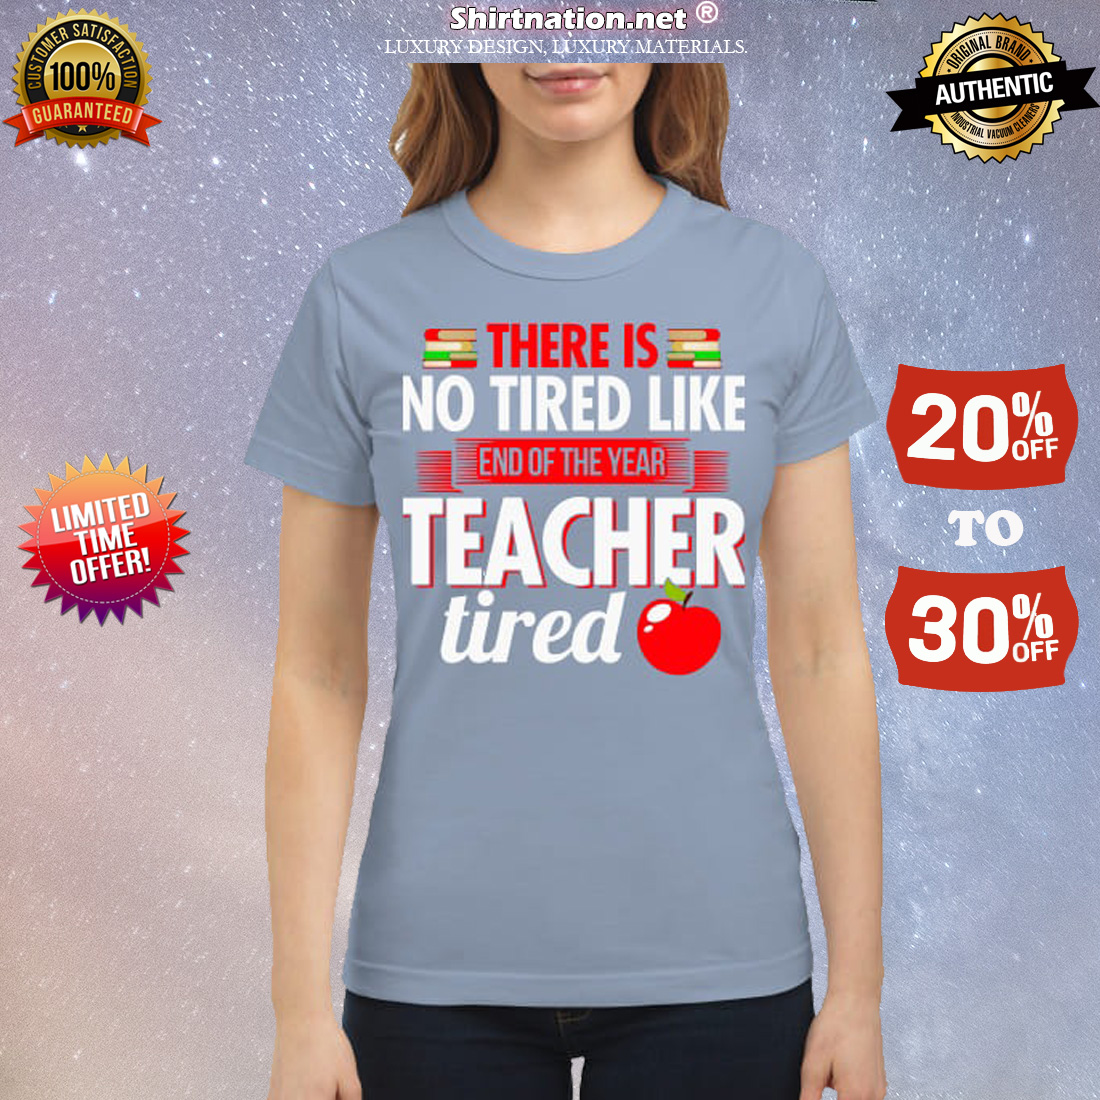 There is no tired like end of year teacher tired classic shirt